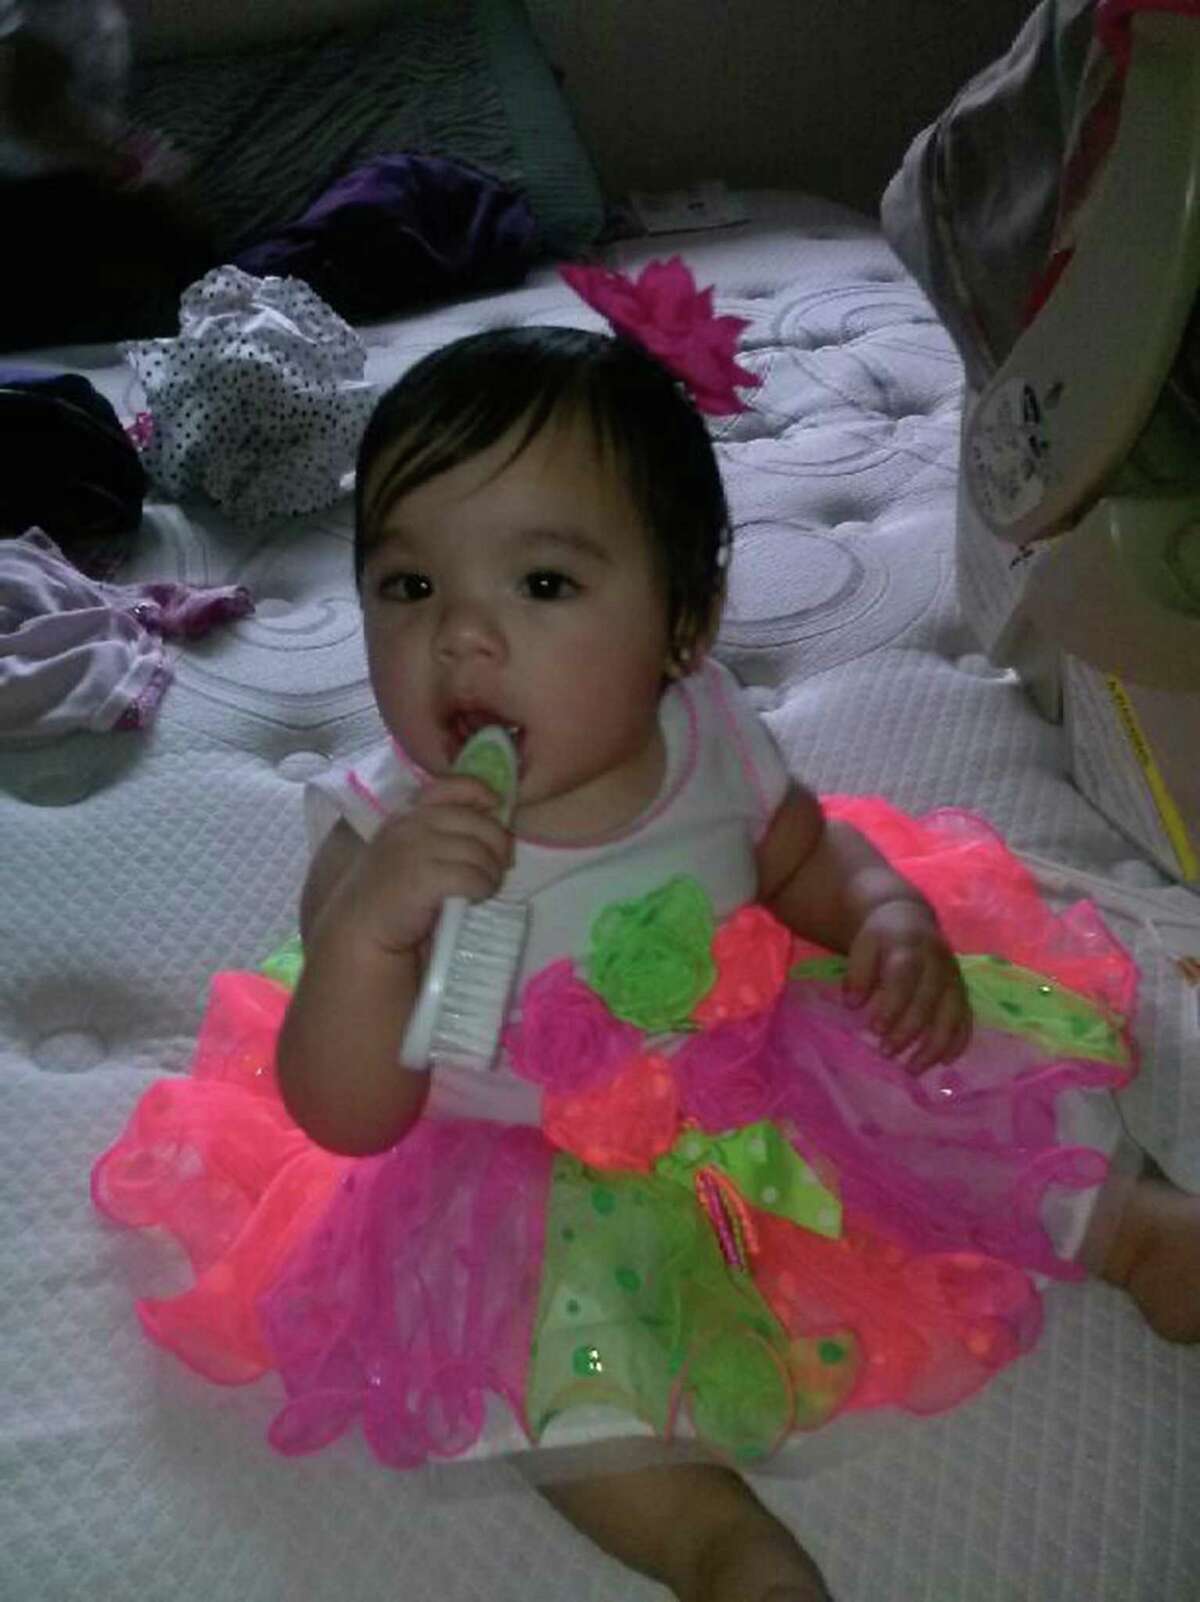 Rubi Duncan, 11-months-old, died Monday night she was found face-down in a bathtub at a Northeast Side apartment.